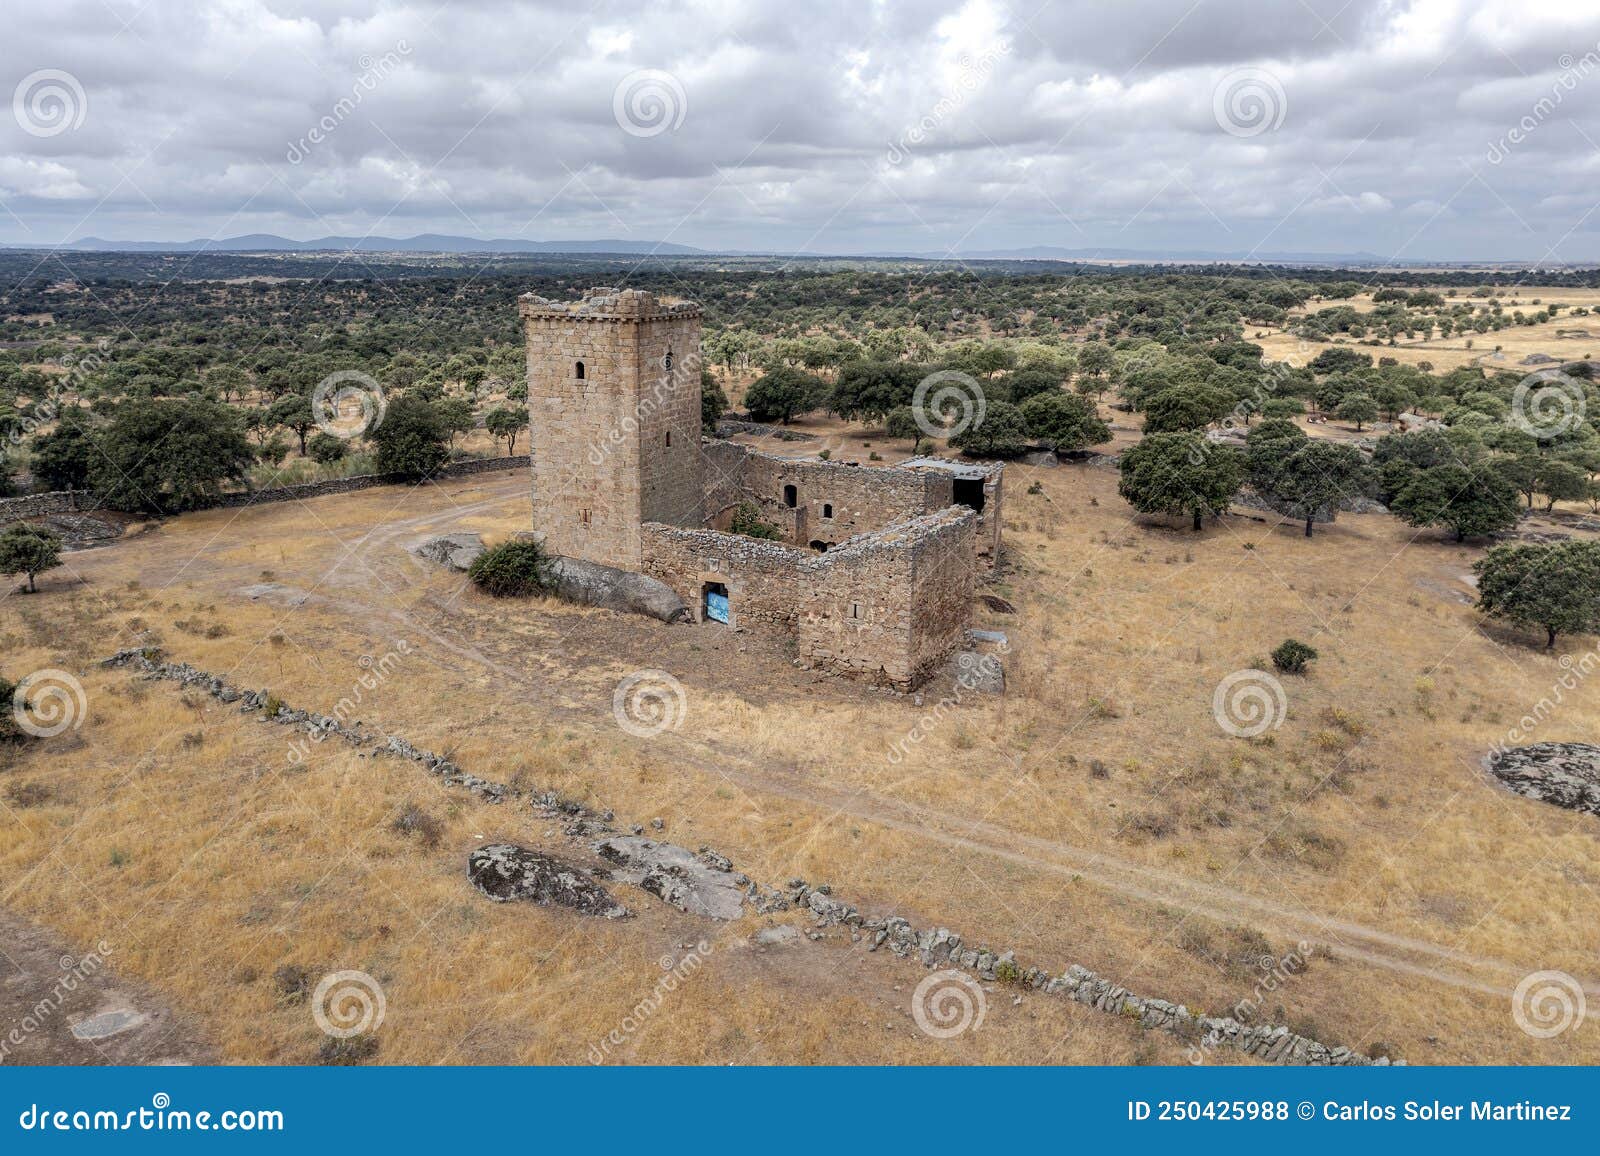 castillo del cachorro located north of the salor river and southwest of the town of torreorgaz, province of caceres extremadura,